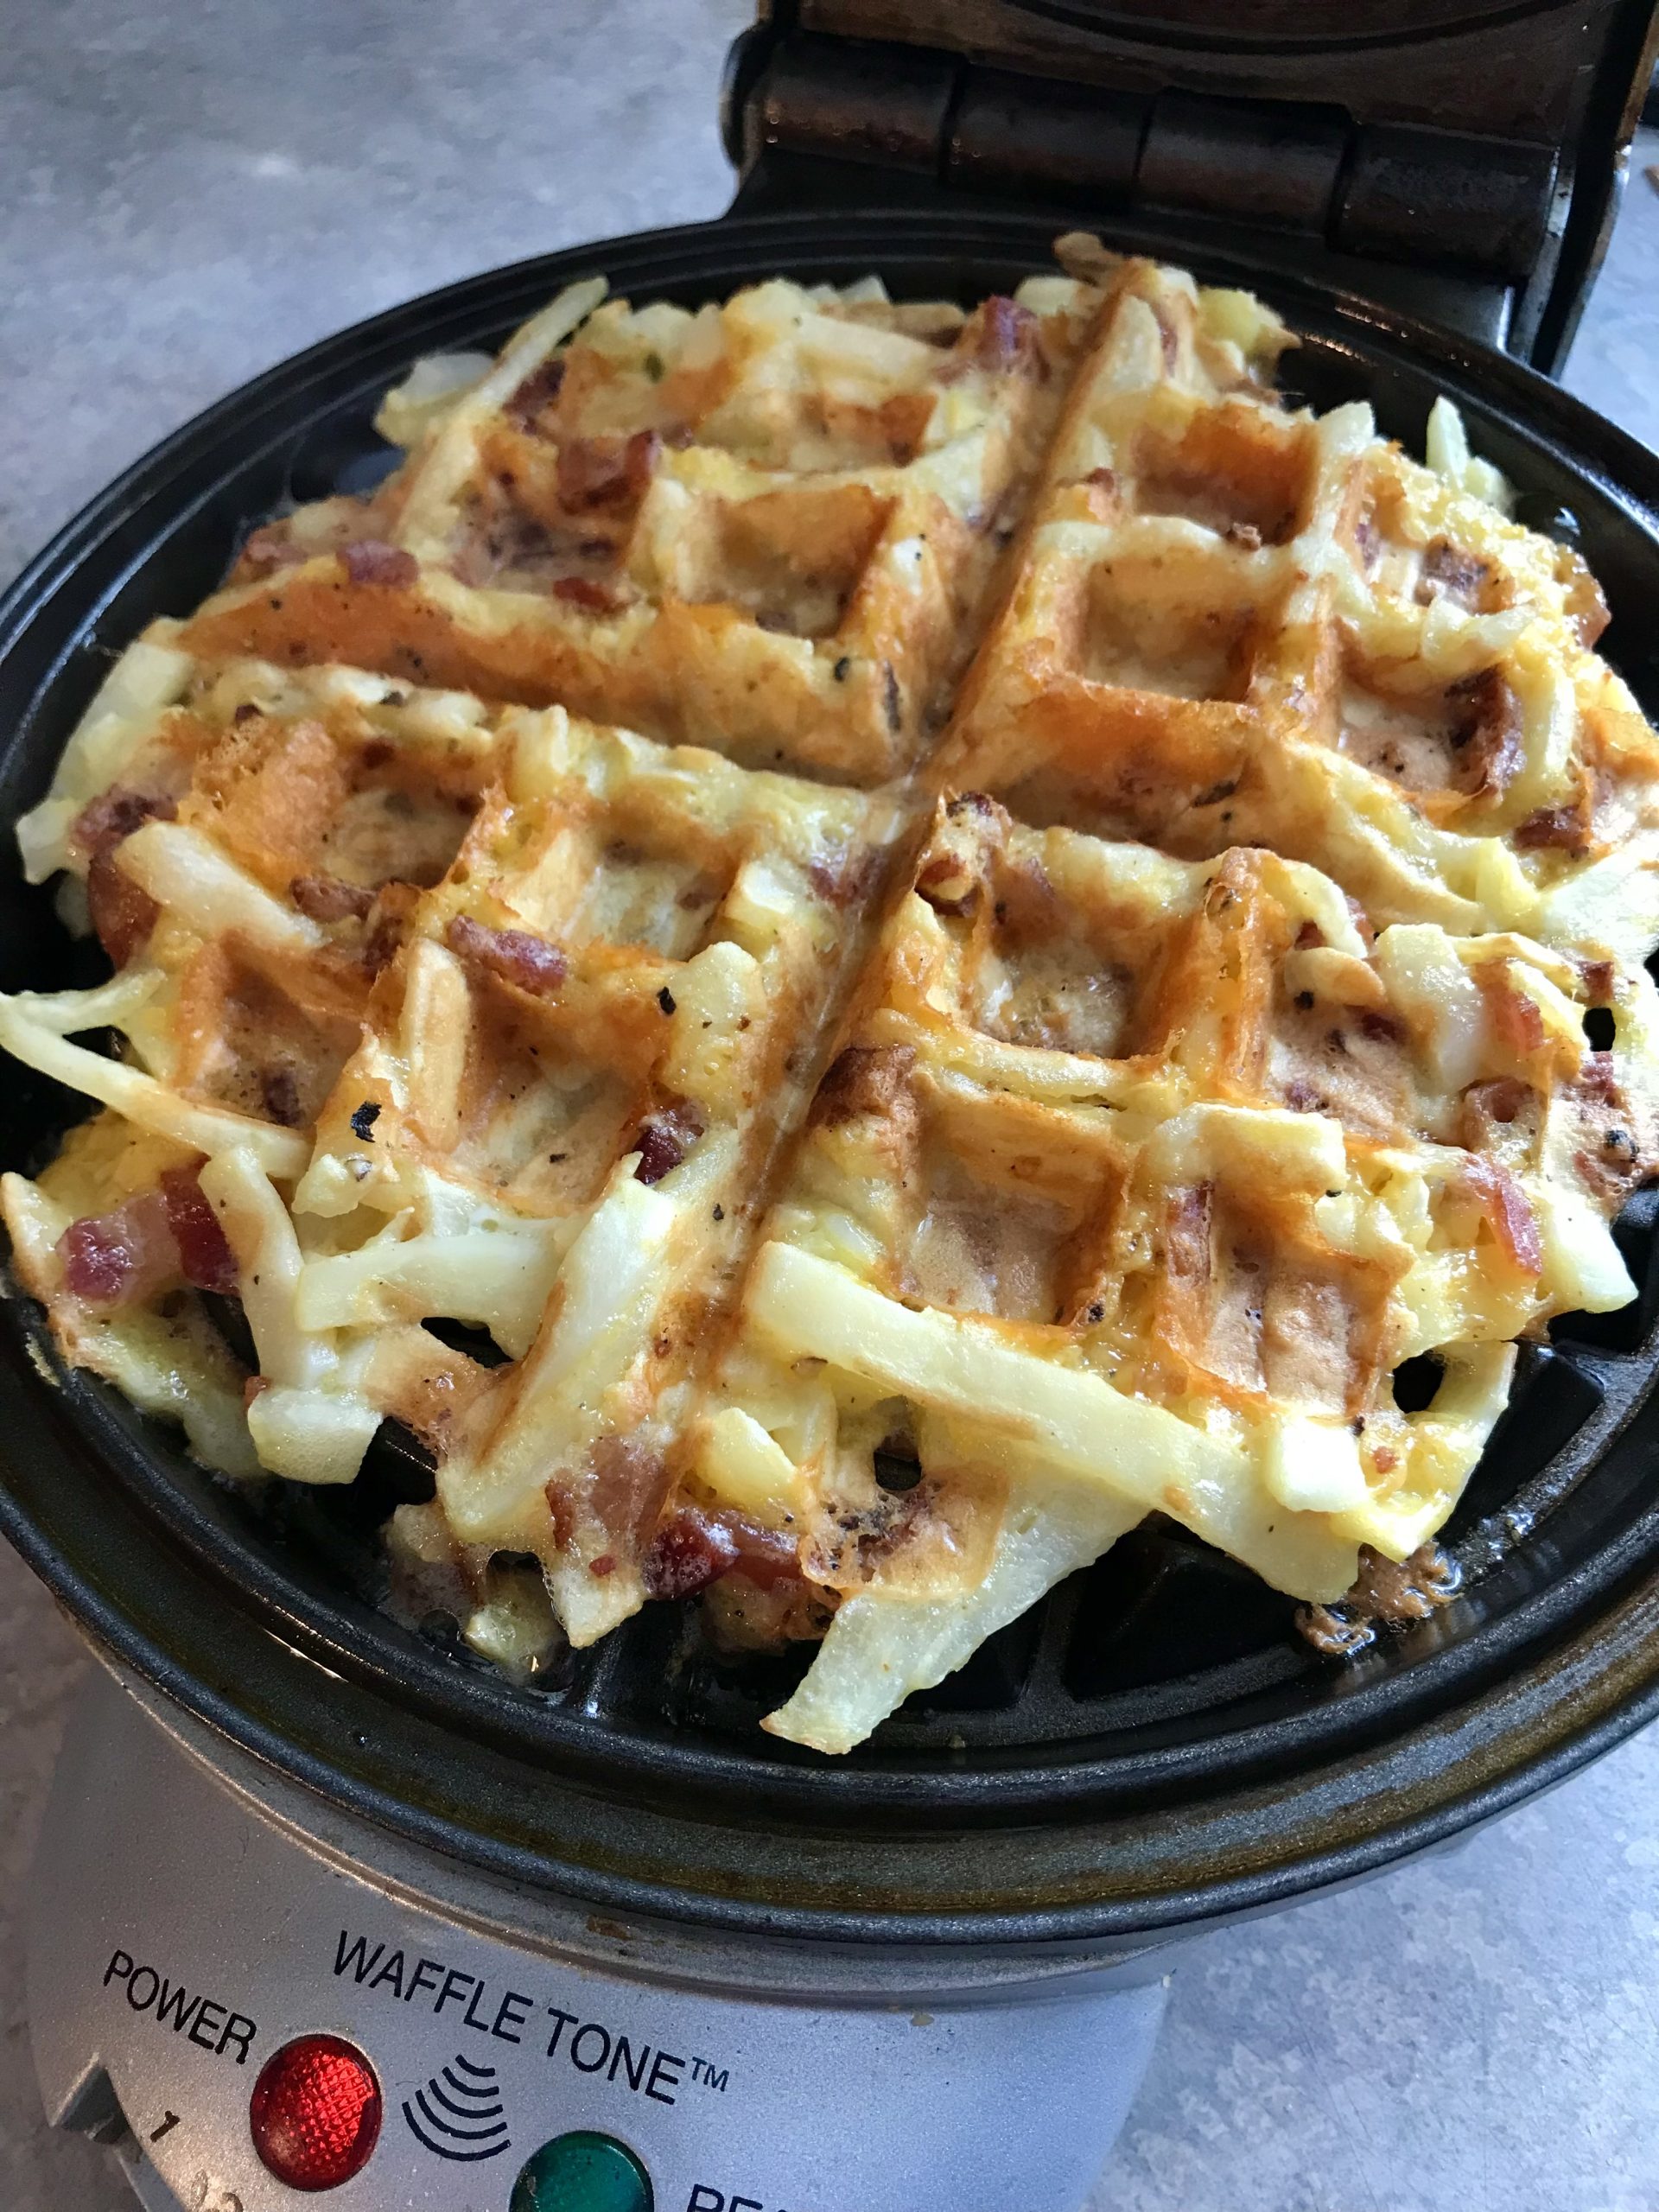 https://www.onehundreddollarsamonth.com/wp-content/uploads/2022/02/Hash-Brown-Waffles-with-Bacon-and-Cheese-scaled.jpg